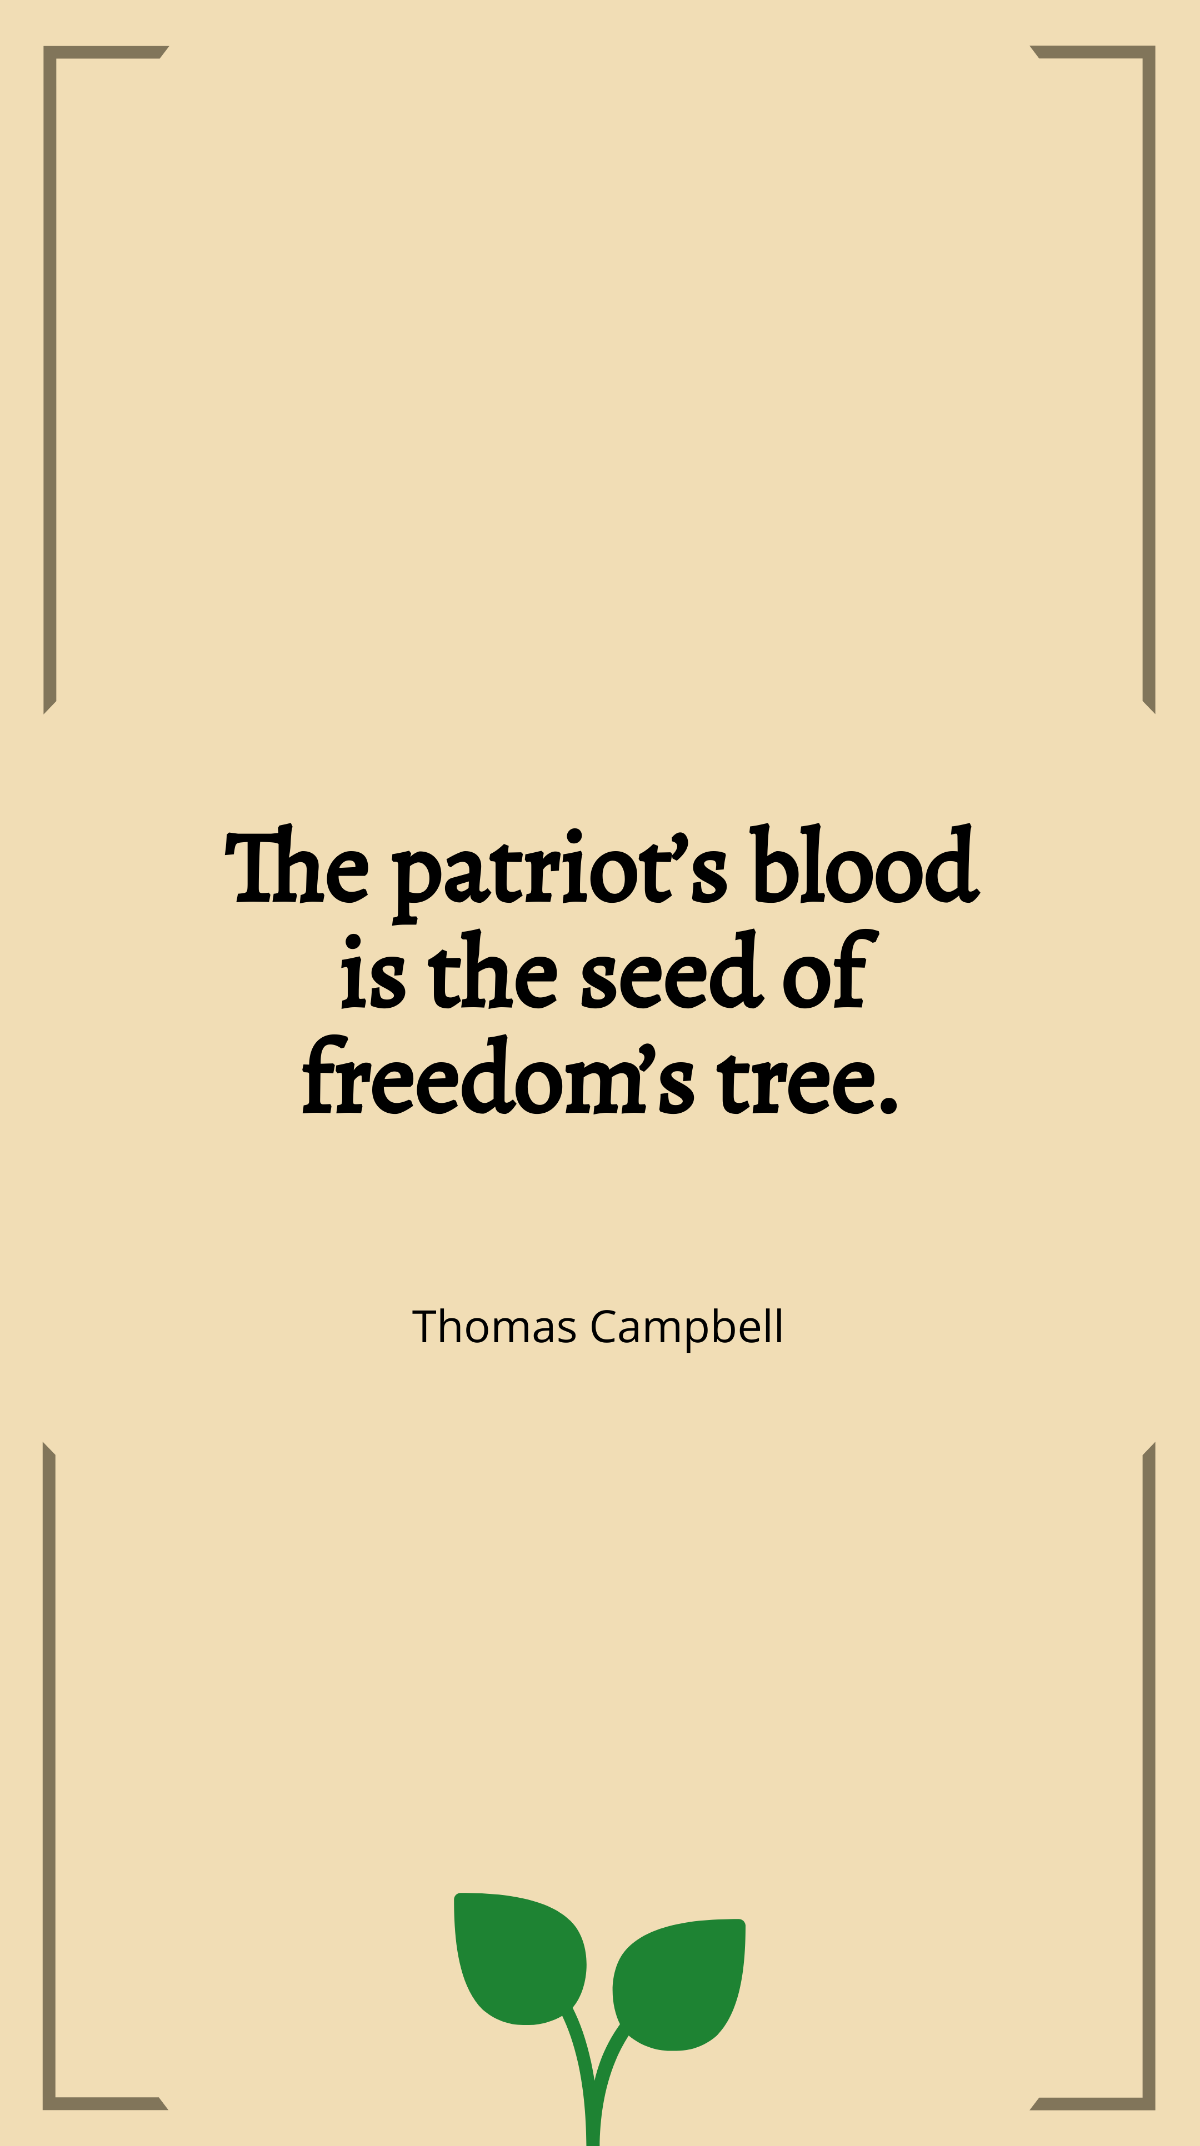 Thomas Campbell - “The patriot’s blood is the seed of freedom’s tree.” Template